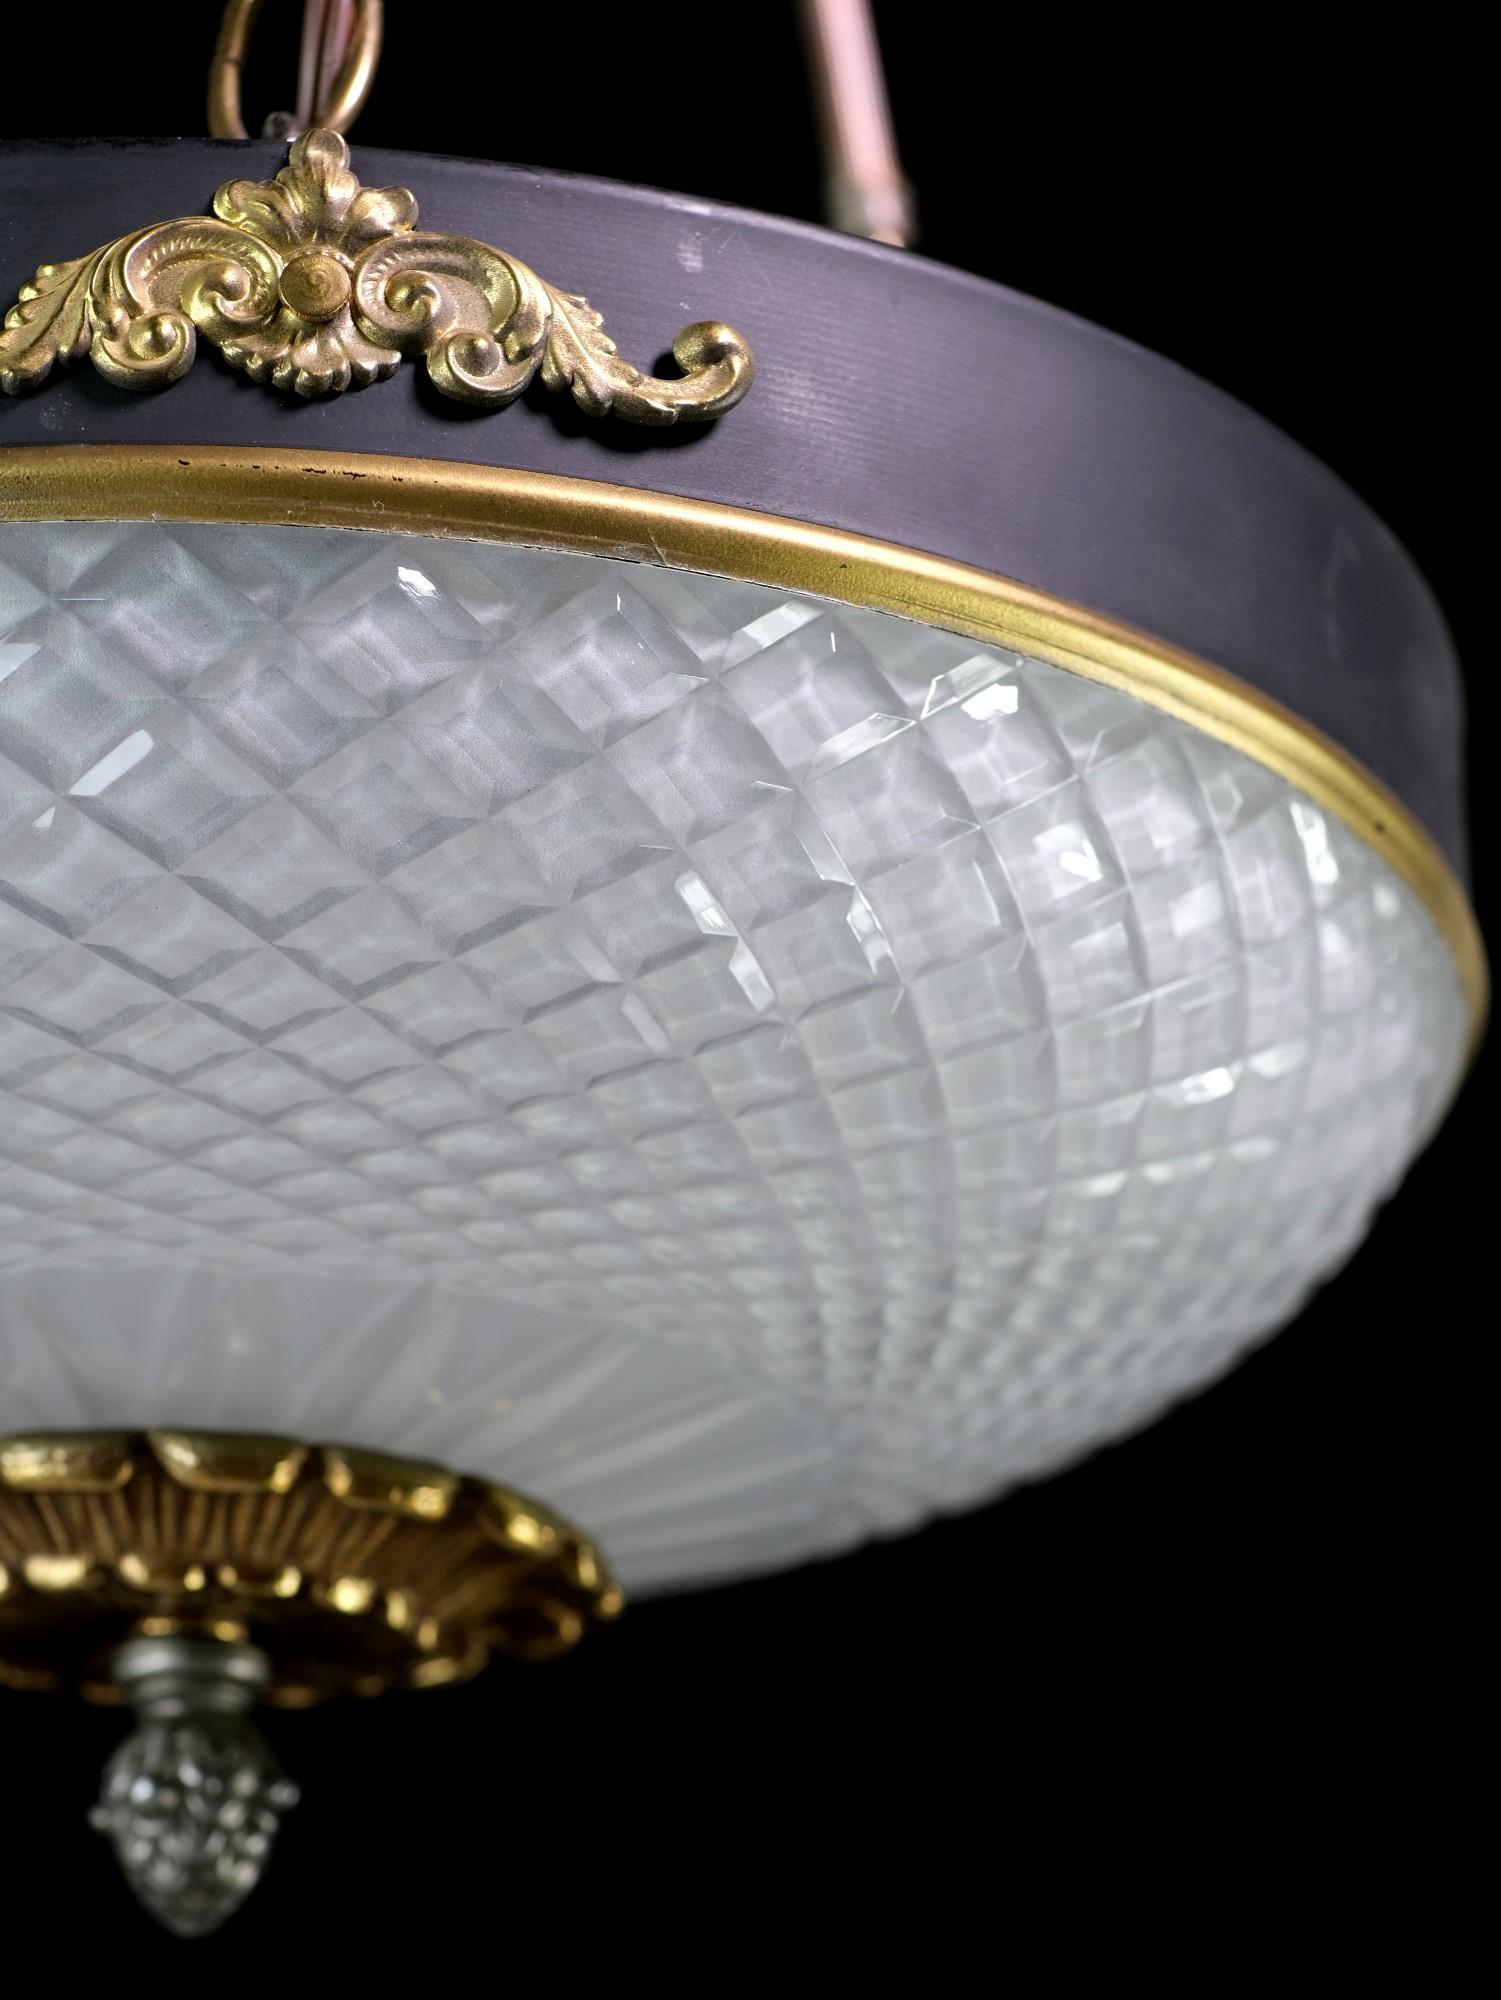 This pair of empire style pendant dish lights are original to the NYC Waldorf Astoria. They feature frosted cut glass with etched details with a decorative rim suspended by three brass rods attached to the brass canopy. These lights graced the